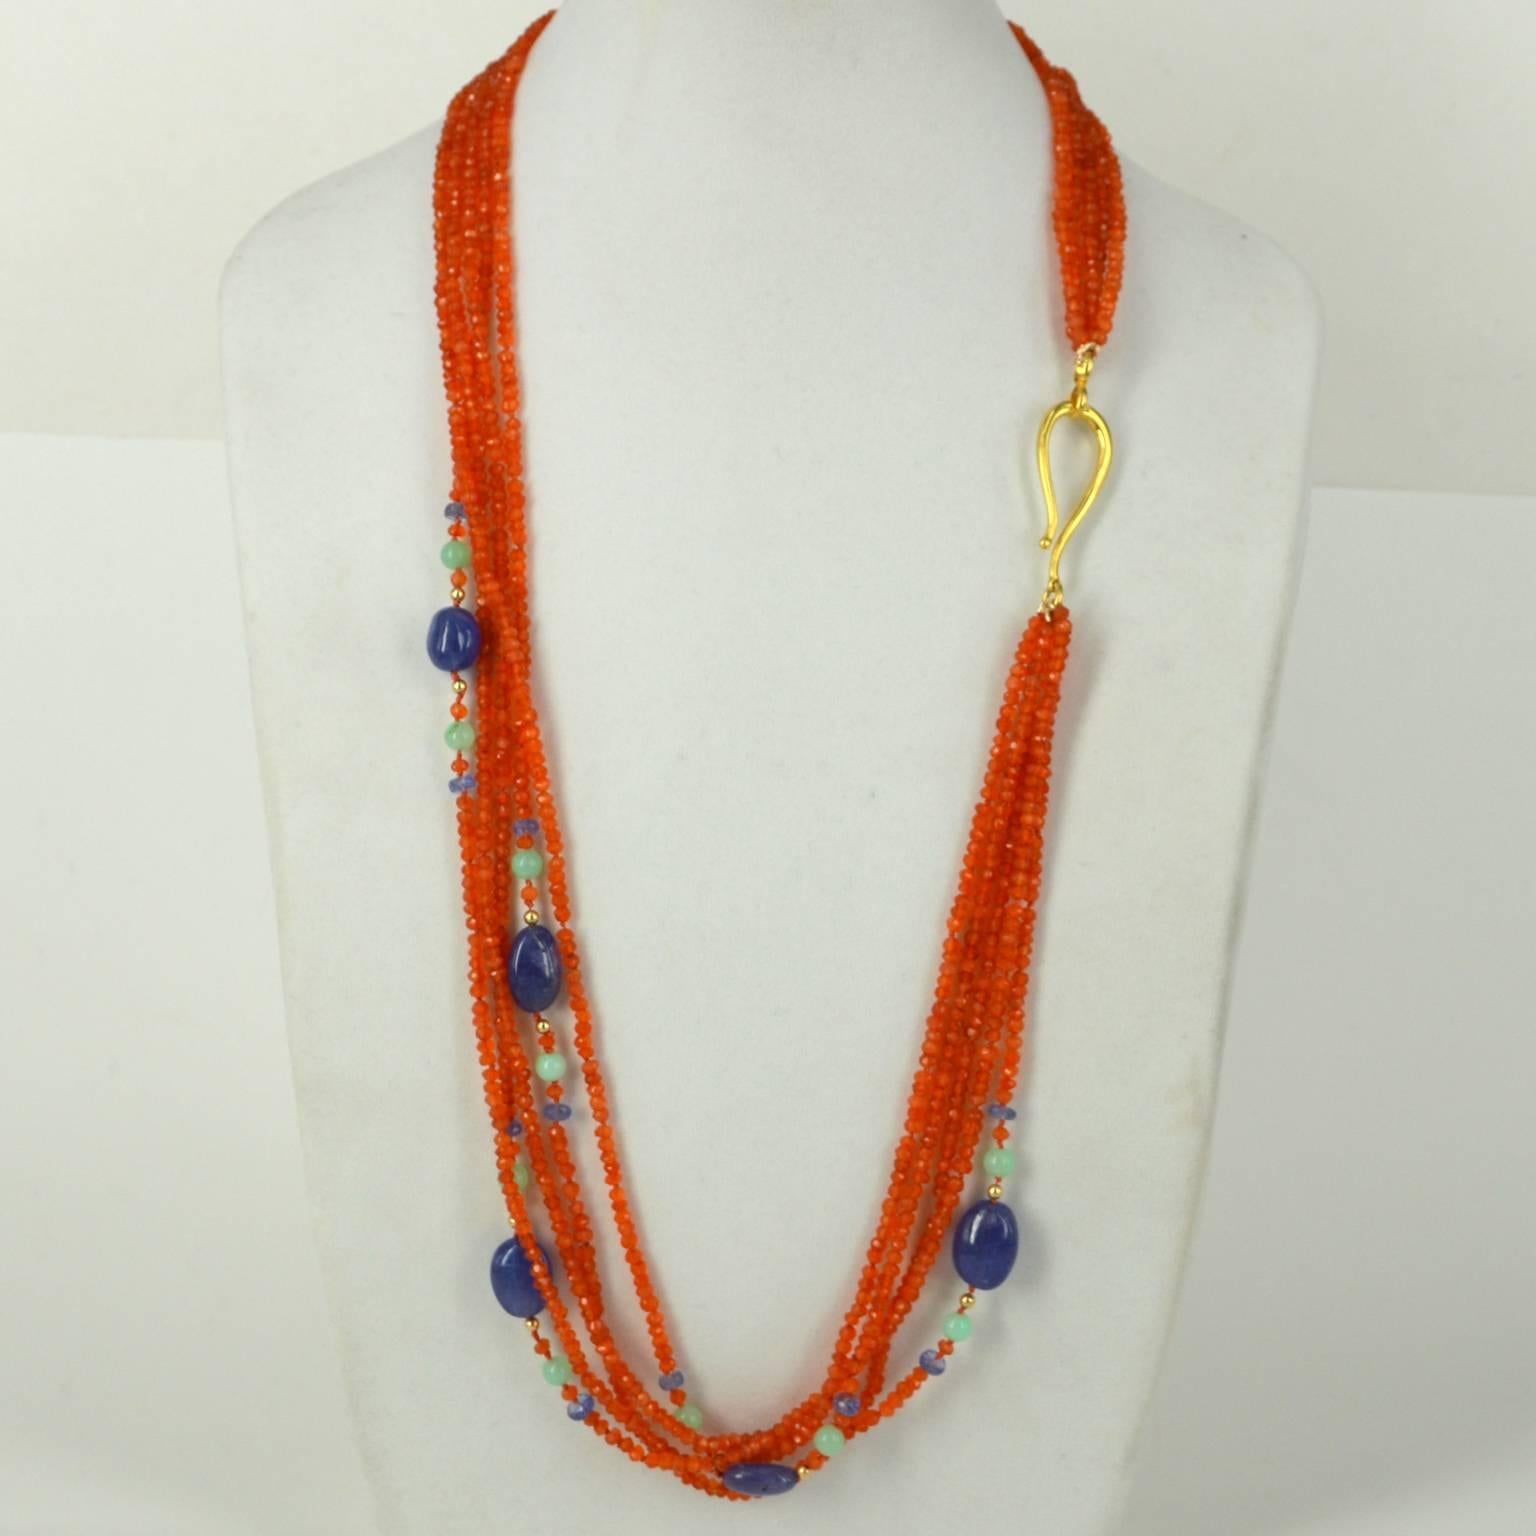 5 Strands of Faceted 4x3mm Carnelian Beads spaced with faceted Tanzanite beads, 6mm Australian Chrsophrase and 5 polished Tanzanite nuggets ranging from 12.8-9.3mm to 16.6x12.2mmon Gold beads are 3mm 14k Gold filled beads and necklace is finished